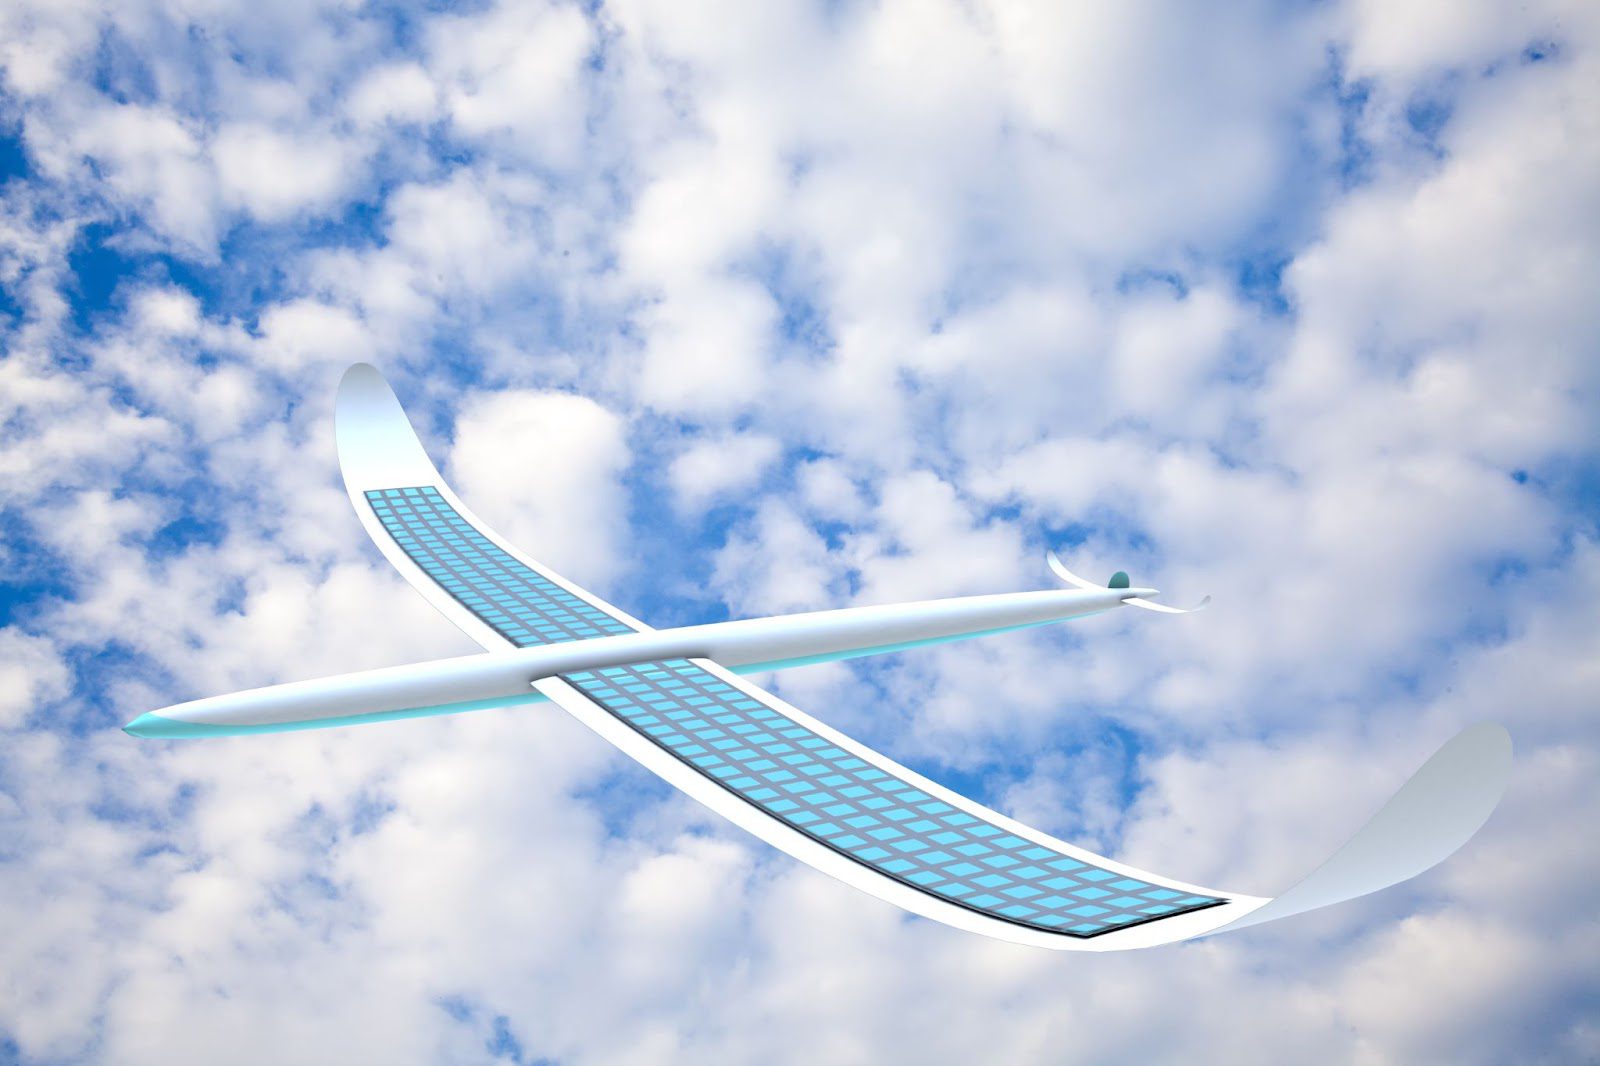 Even in more traditional aviation applications, photovoltaic cells are anticipated to play an increasingly important role for decarbonization.